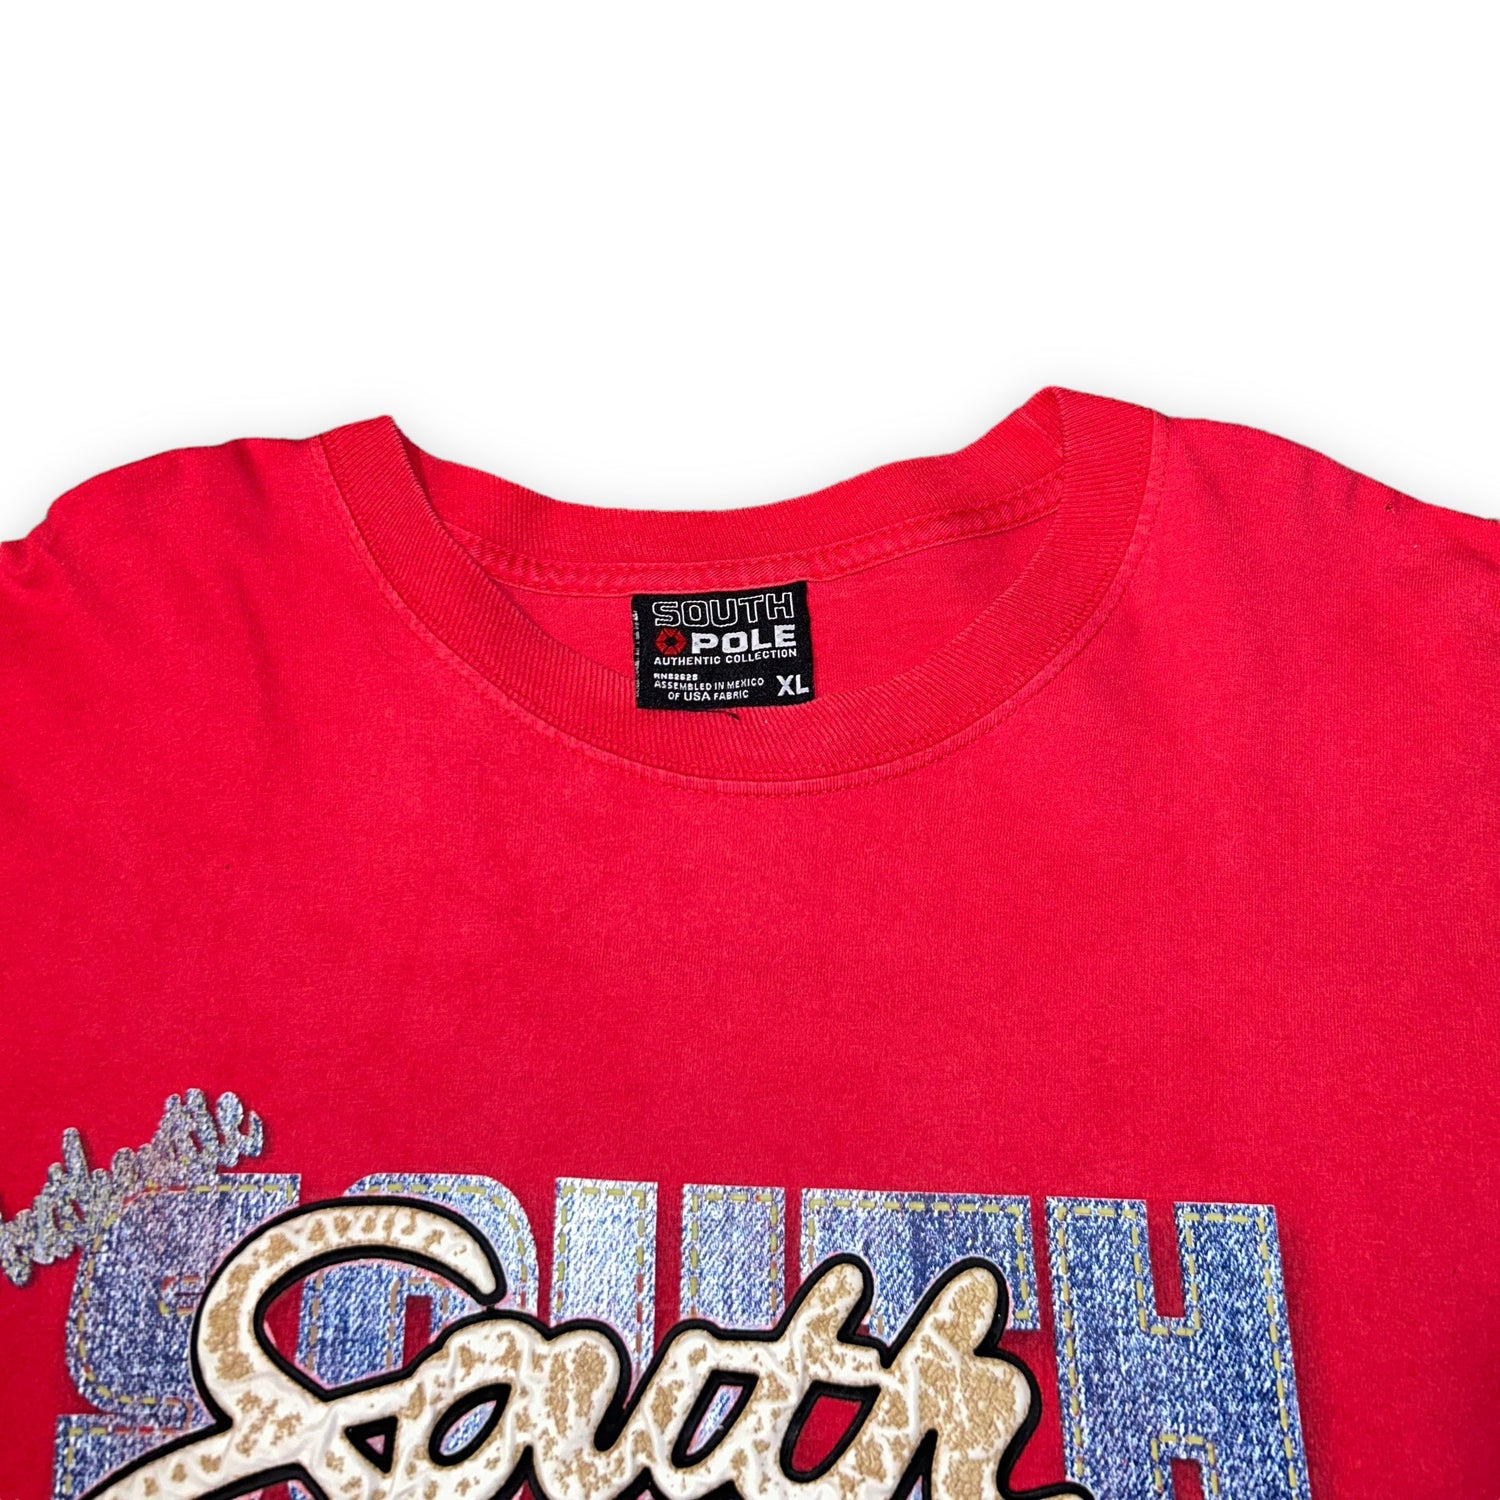 Maglia SouthPole Vintage (XL/XXL) - oldstyleclothing